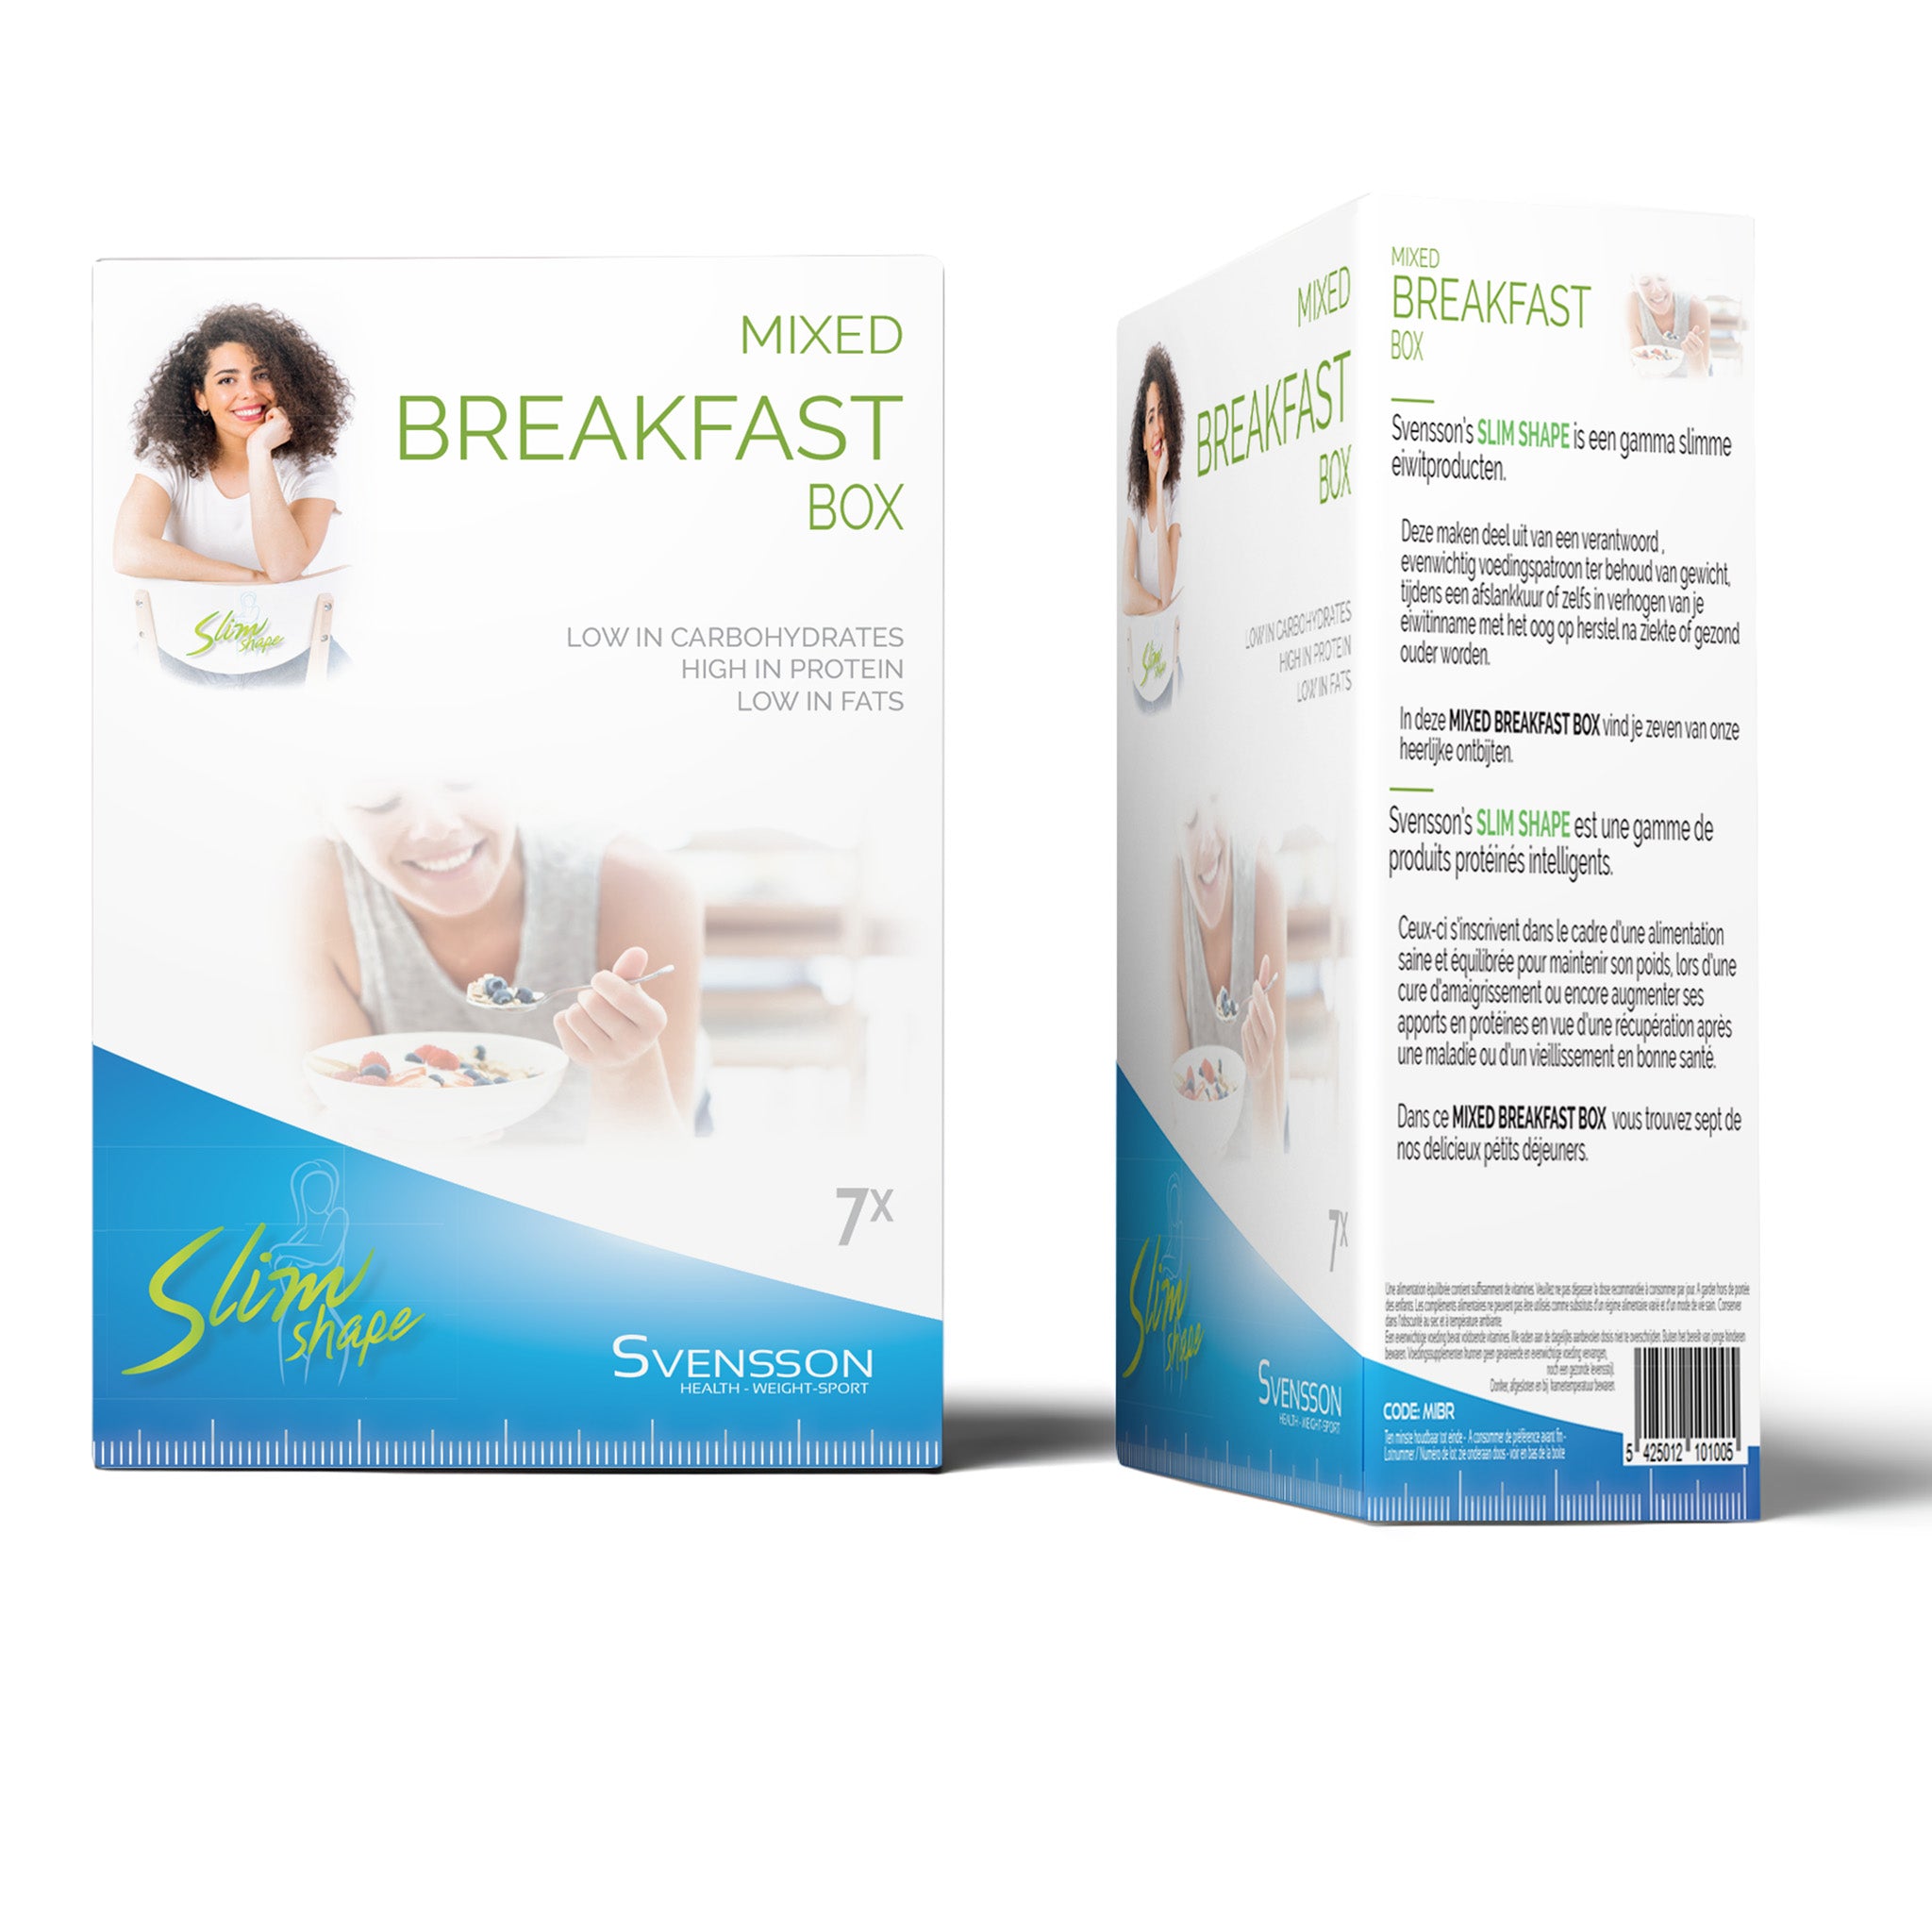 Breakfast box, varied mix of 7 low-carbohydrate breakfasts